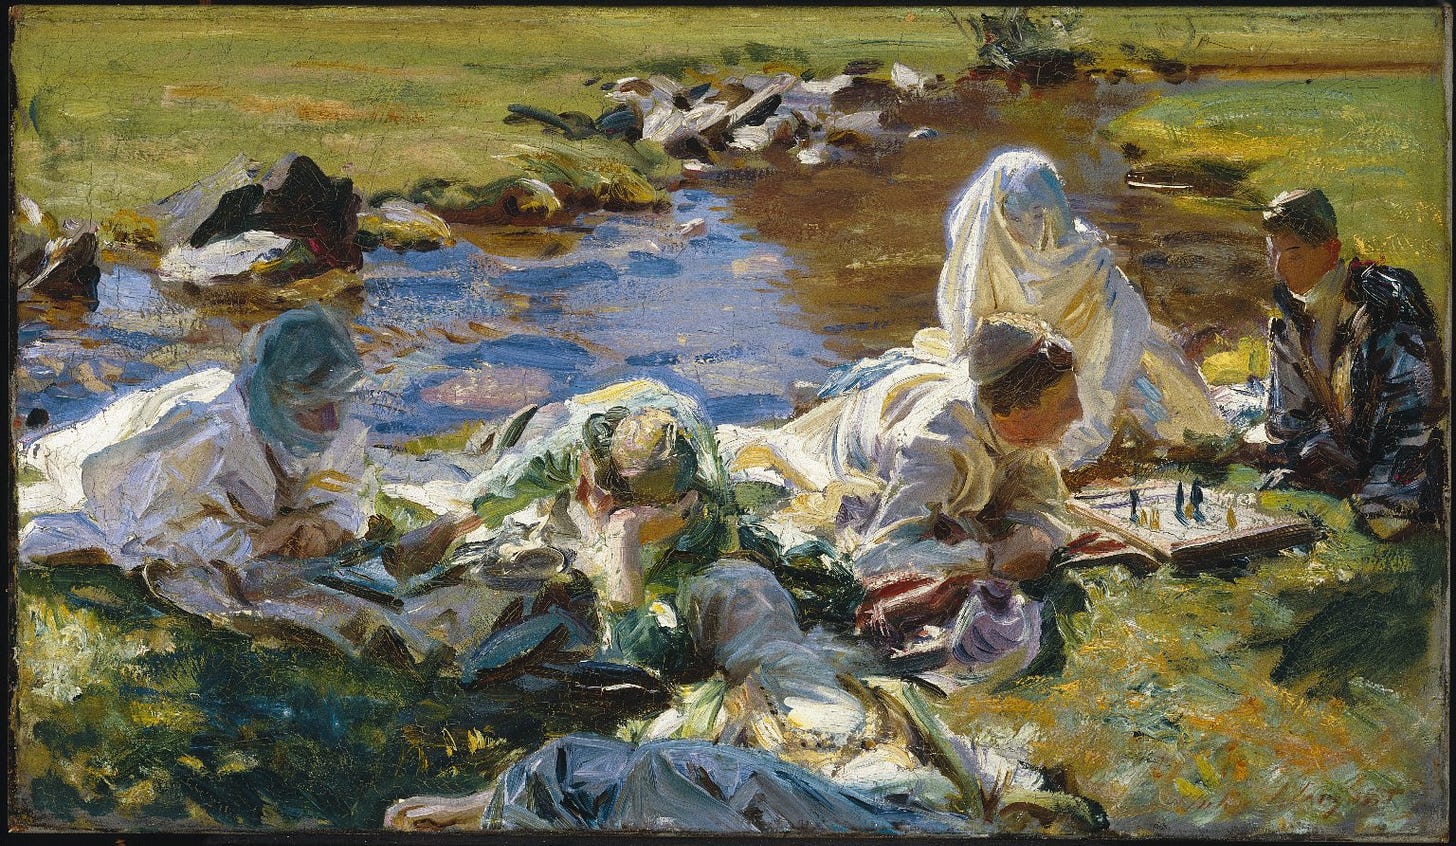 File:Brooklyn Museum - Dolce Far Niente - John Singer Sargent - overall.jpg  - Wikipedia